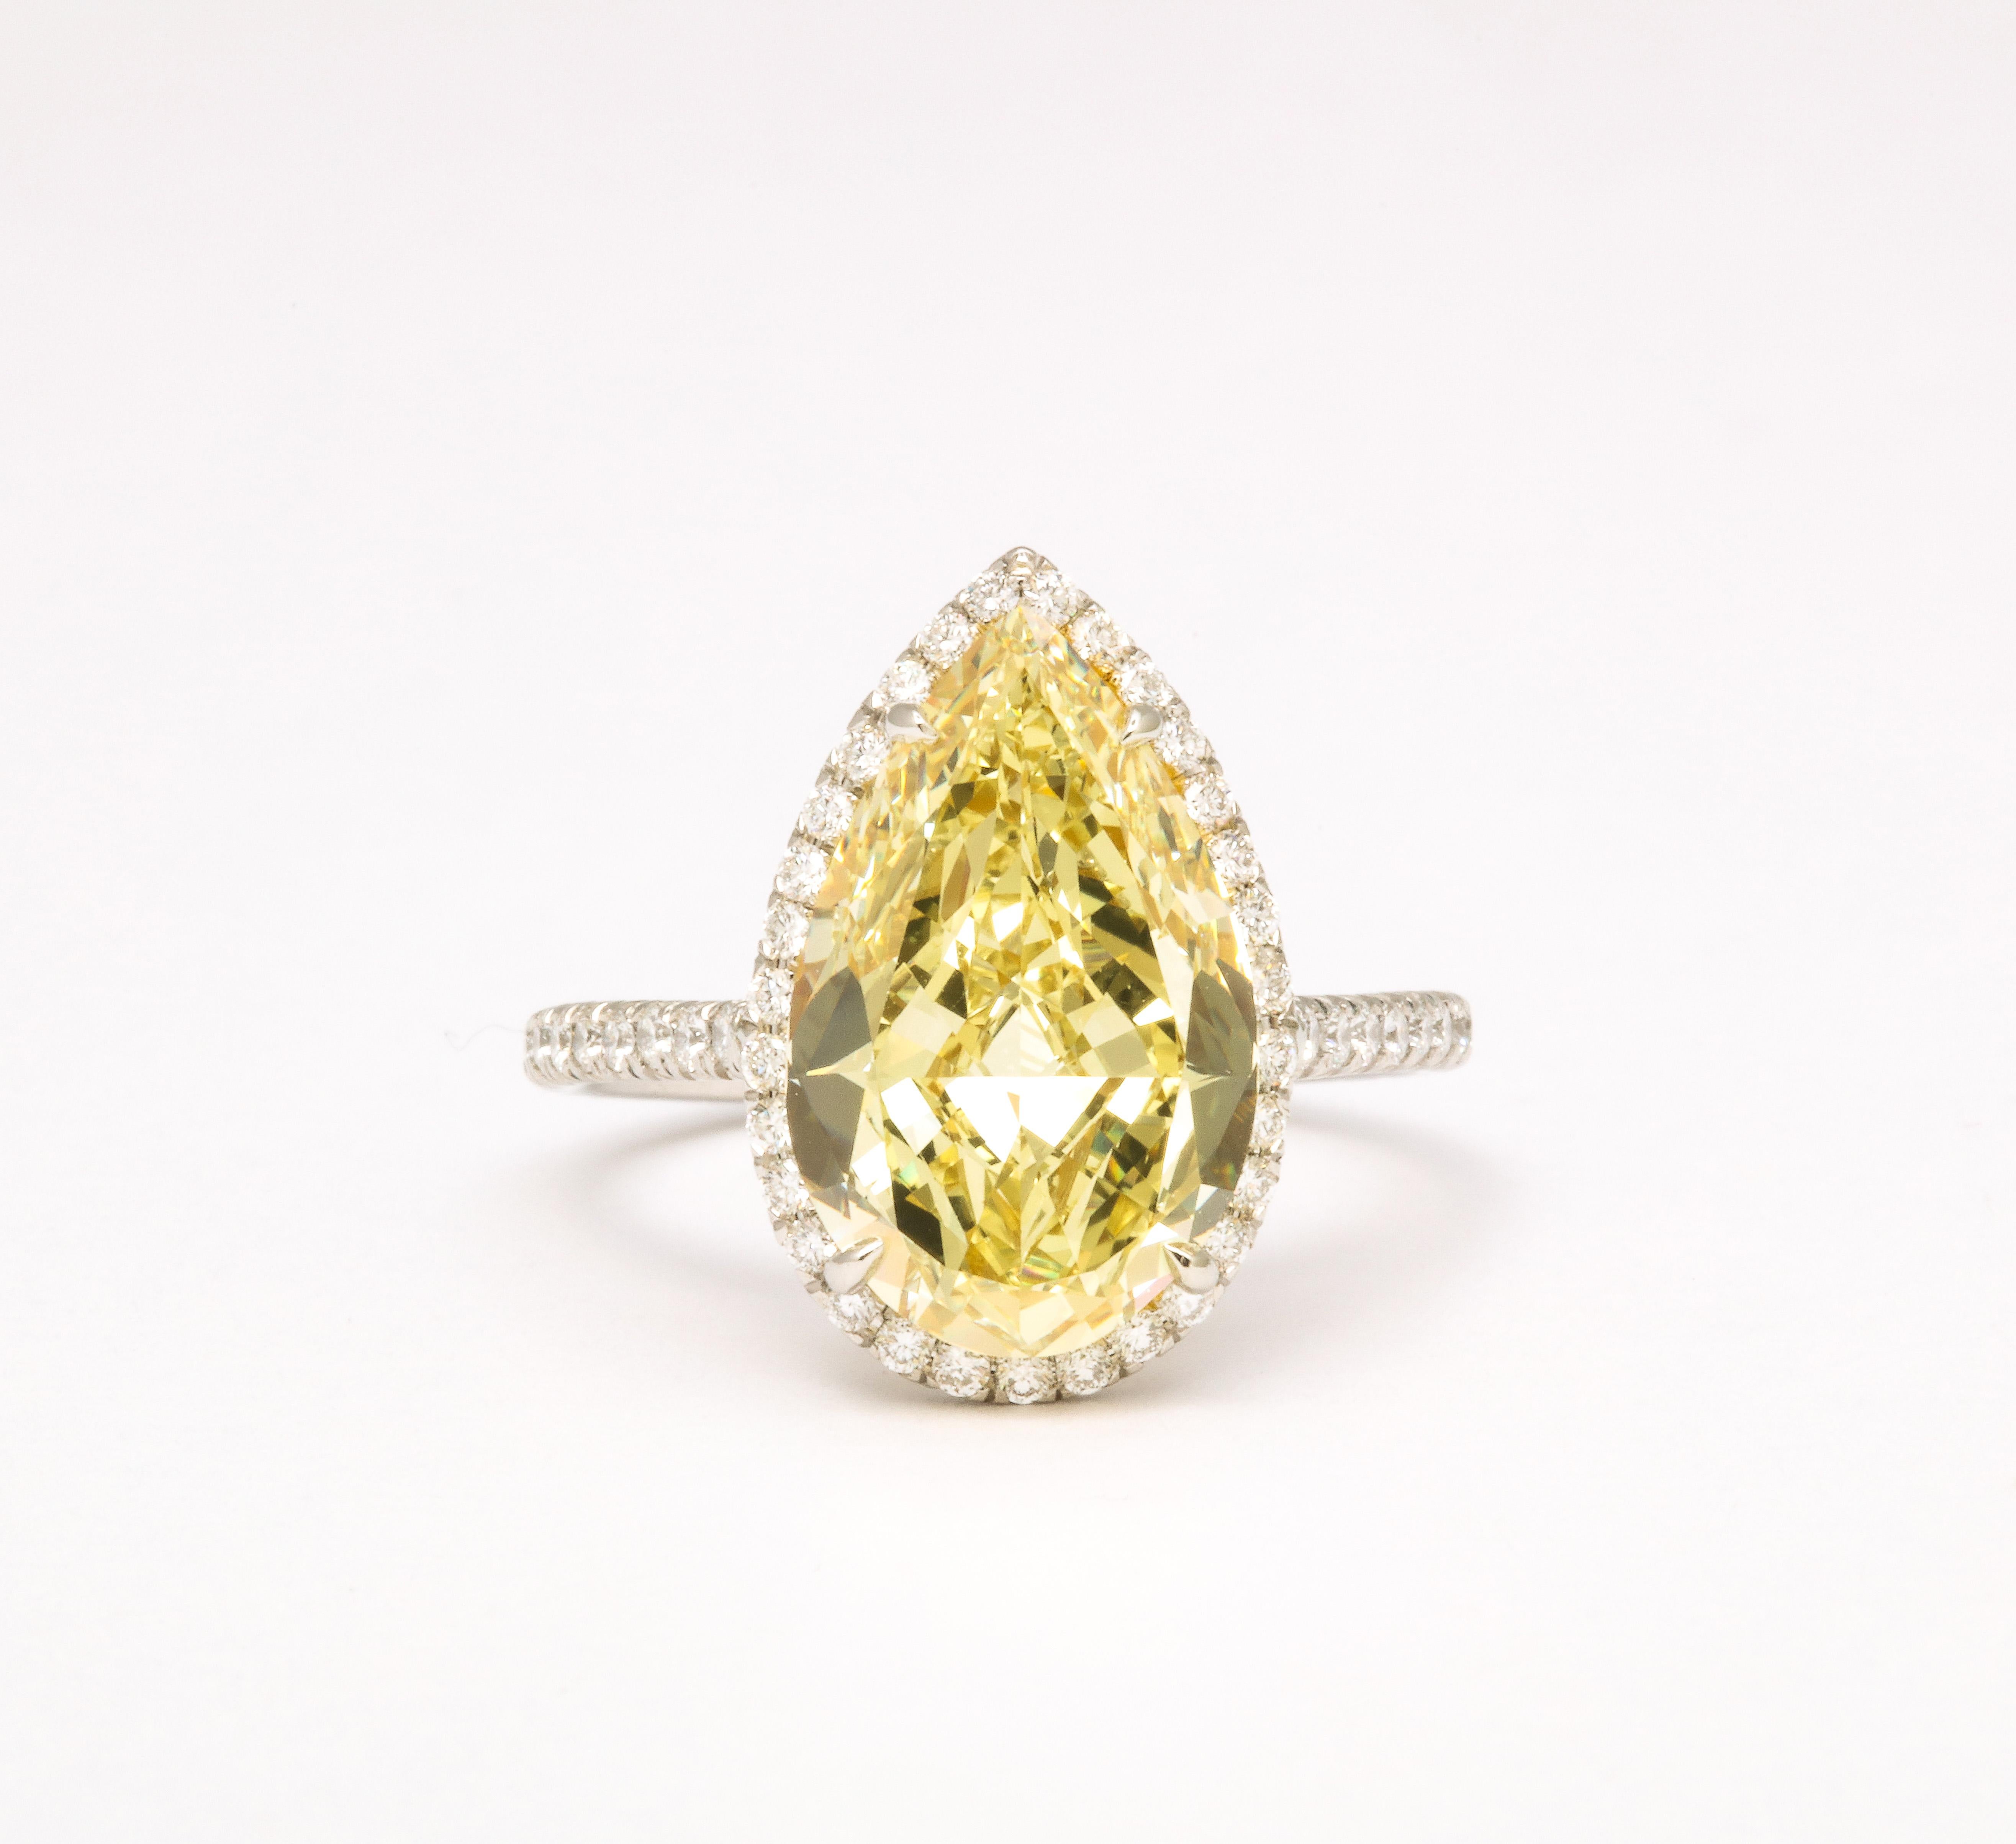 
A FABULOUS pear shape!

GIA certified 5.12 carat Fancy Yellow, VS1 clarity pear shape center diamond. 

.85 carats of white colorless round brilliant cut diamonds set in a custom platinum and 18k yellow gold mounting. 

The center diamond measures